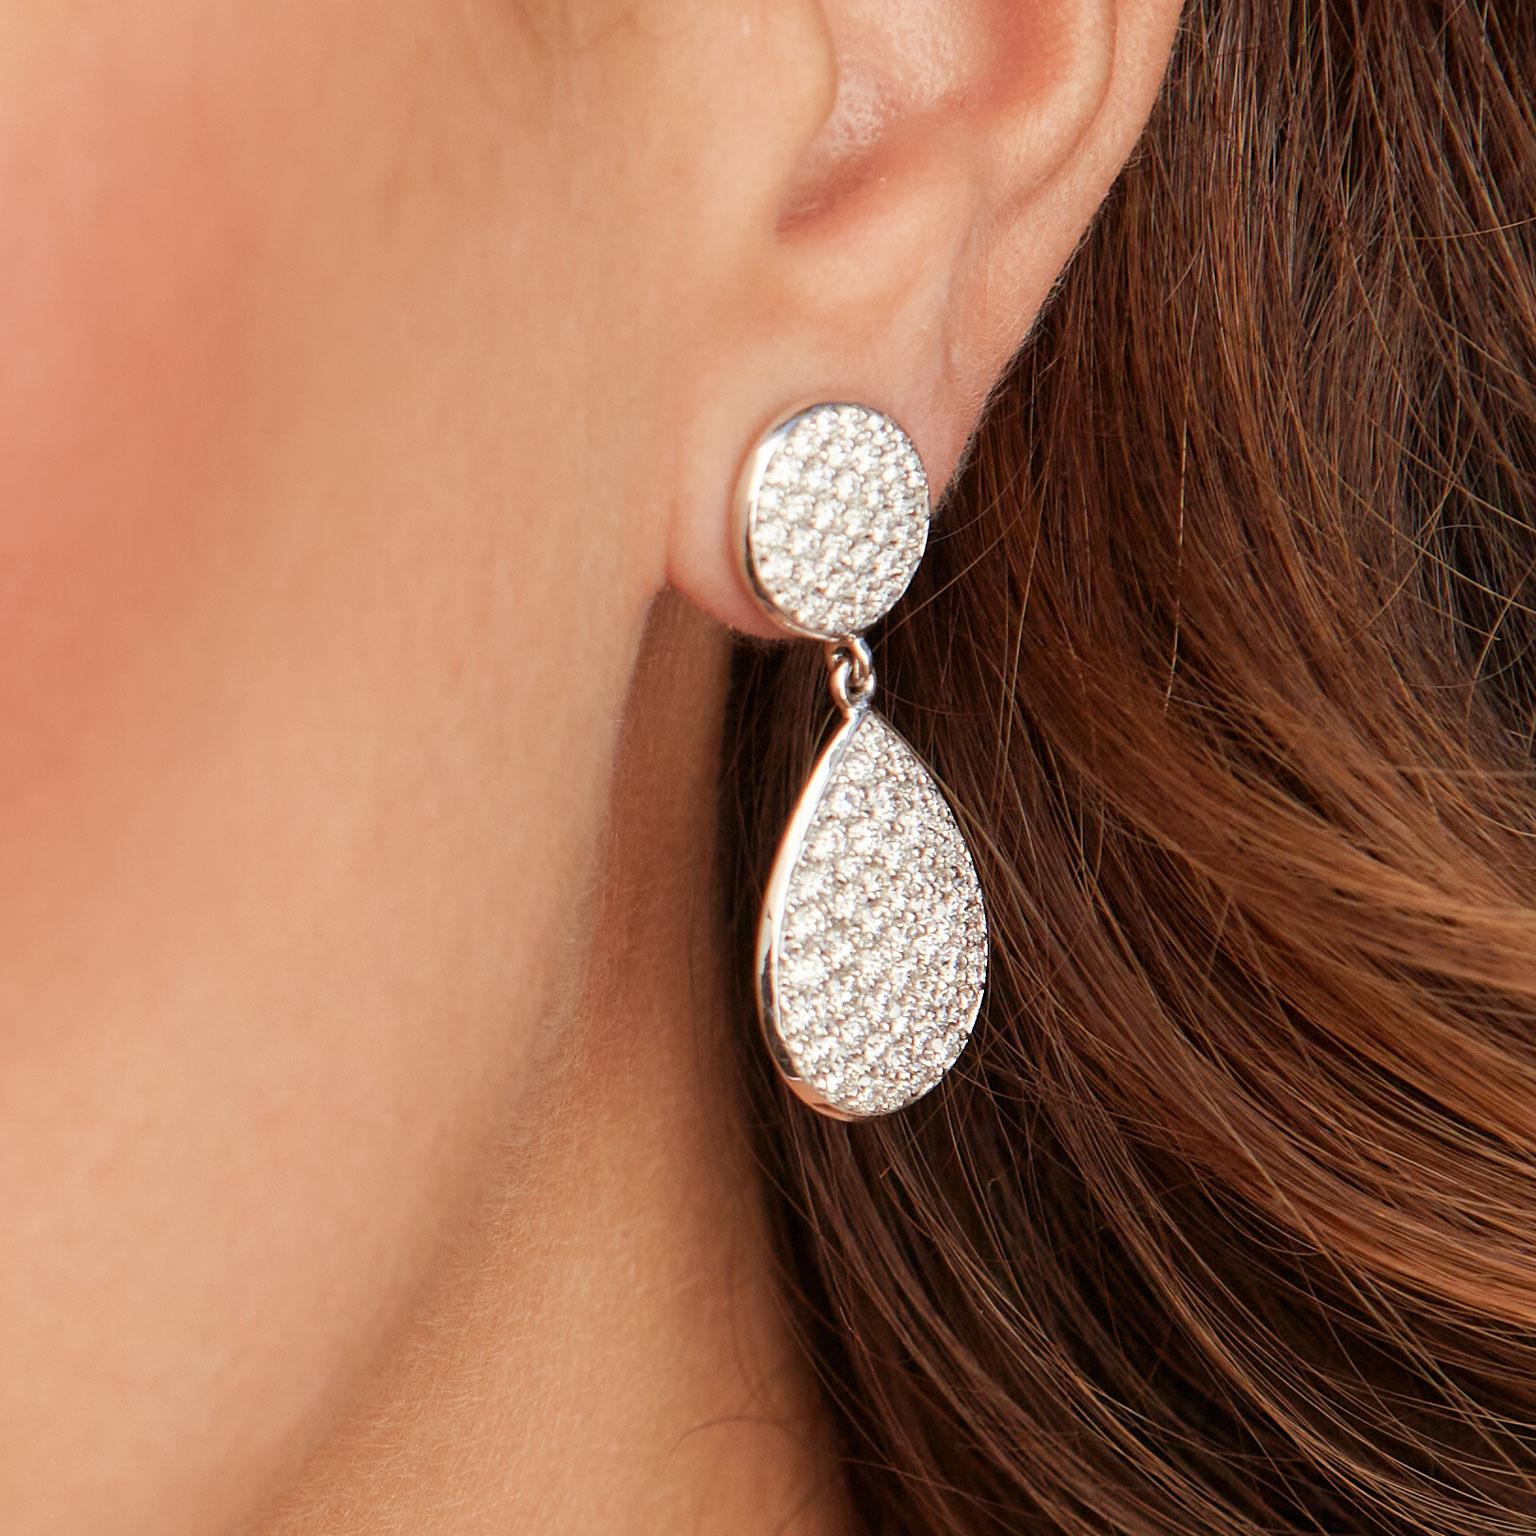 Diamond Pave Drop Earrings 4.05 Carat 18 Karat White Gold Earrings

These glamourous 14 karat white gold earrings featuring a total weight of 4.05 carat of diamond pave are set in a round and pear shape. 
The top, round portion encompassing the bail